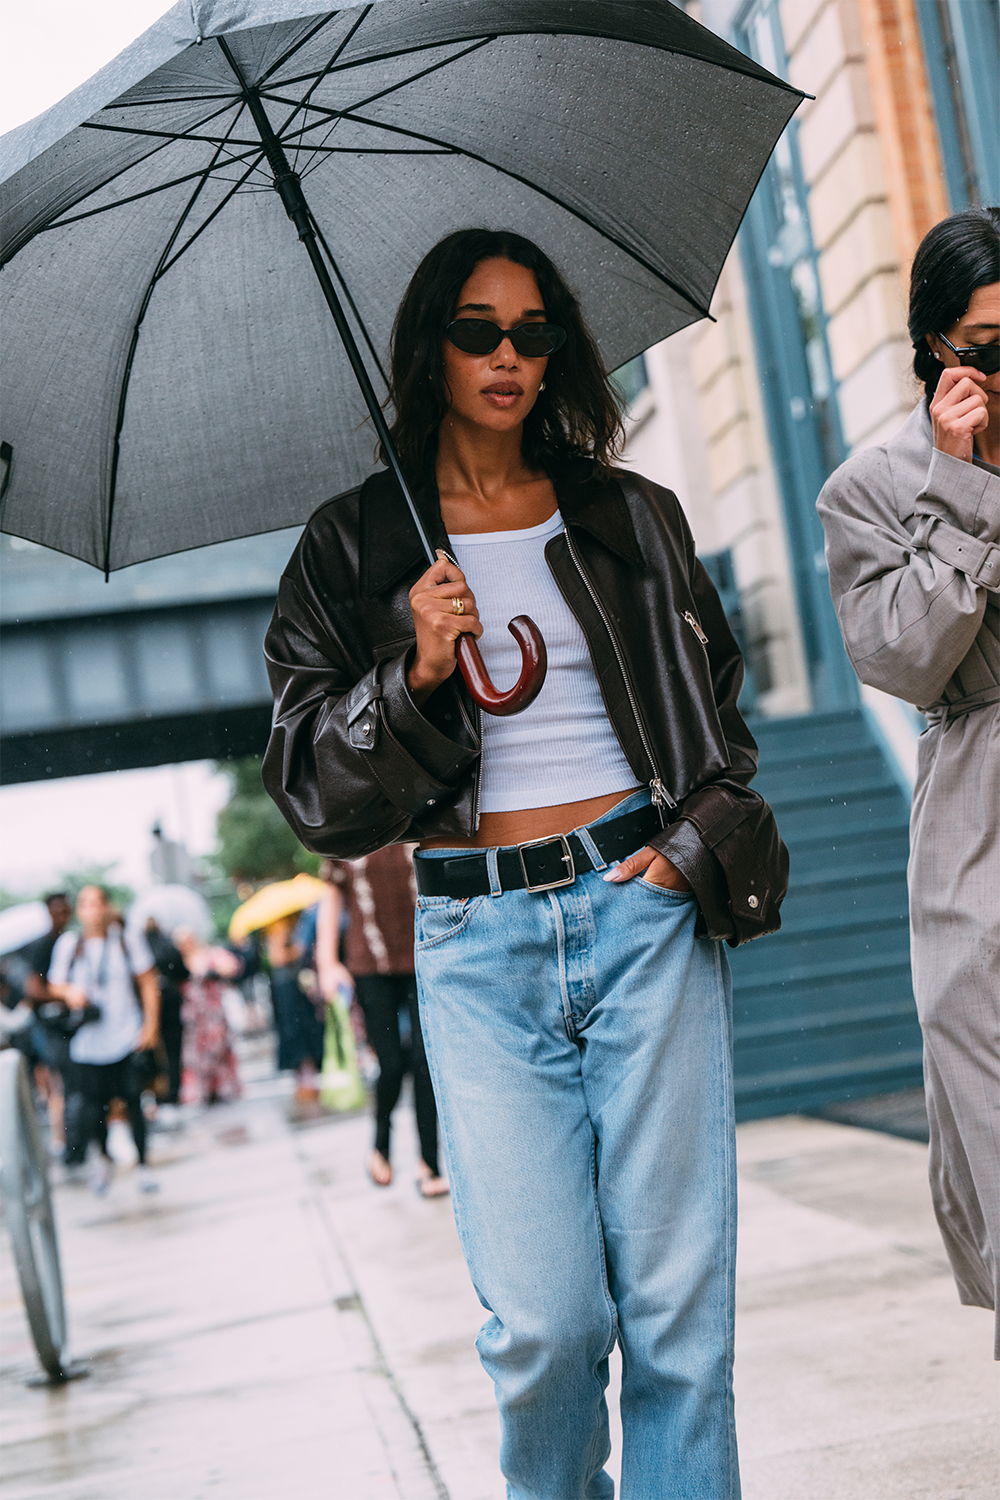 The 8 Items We Saw Everyone Wearing in New York This Week